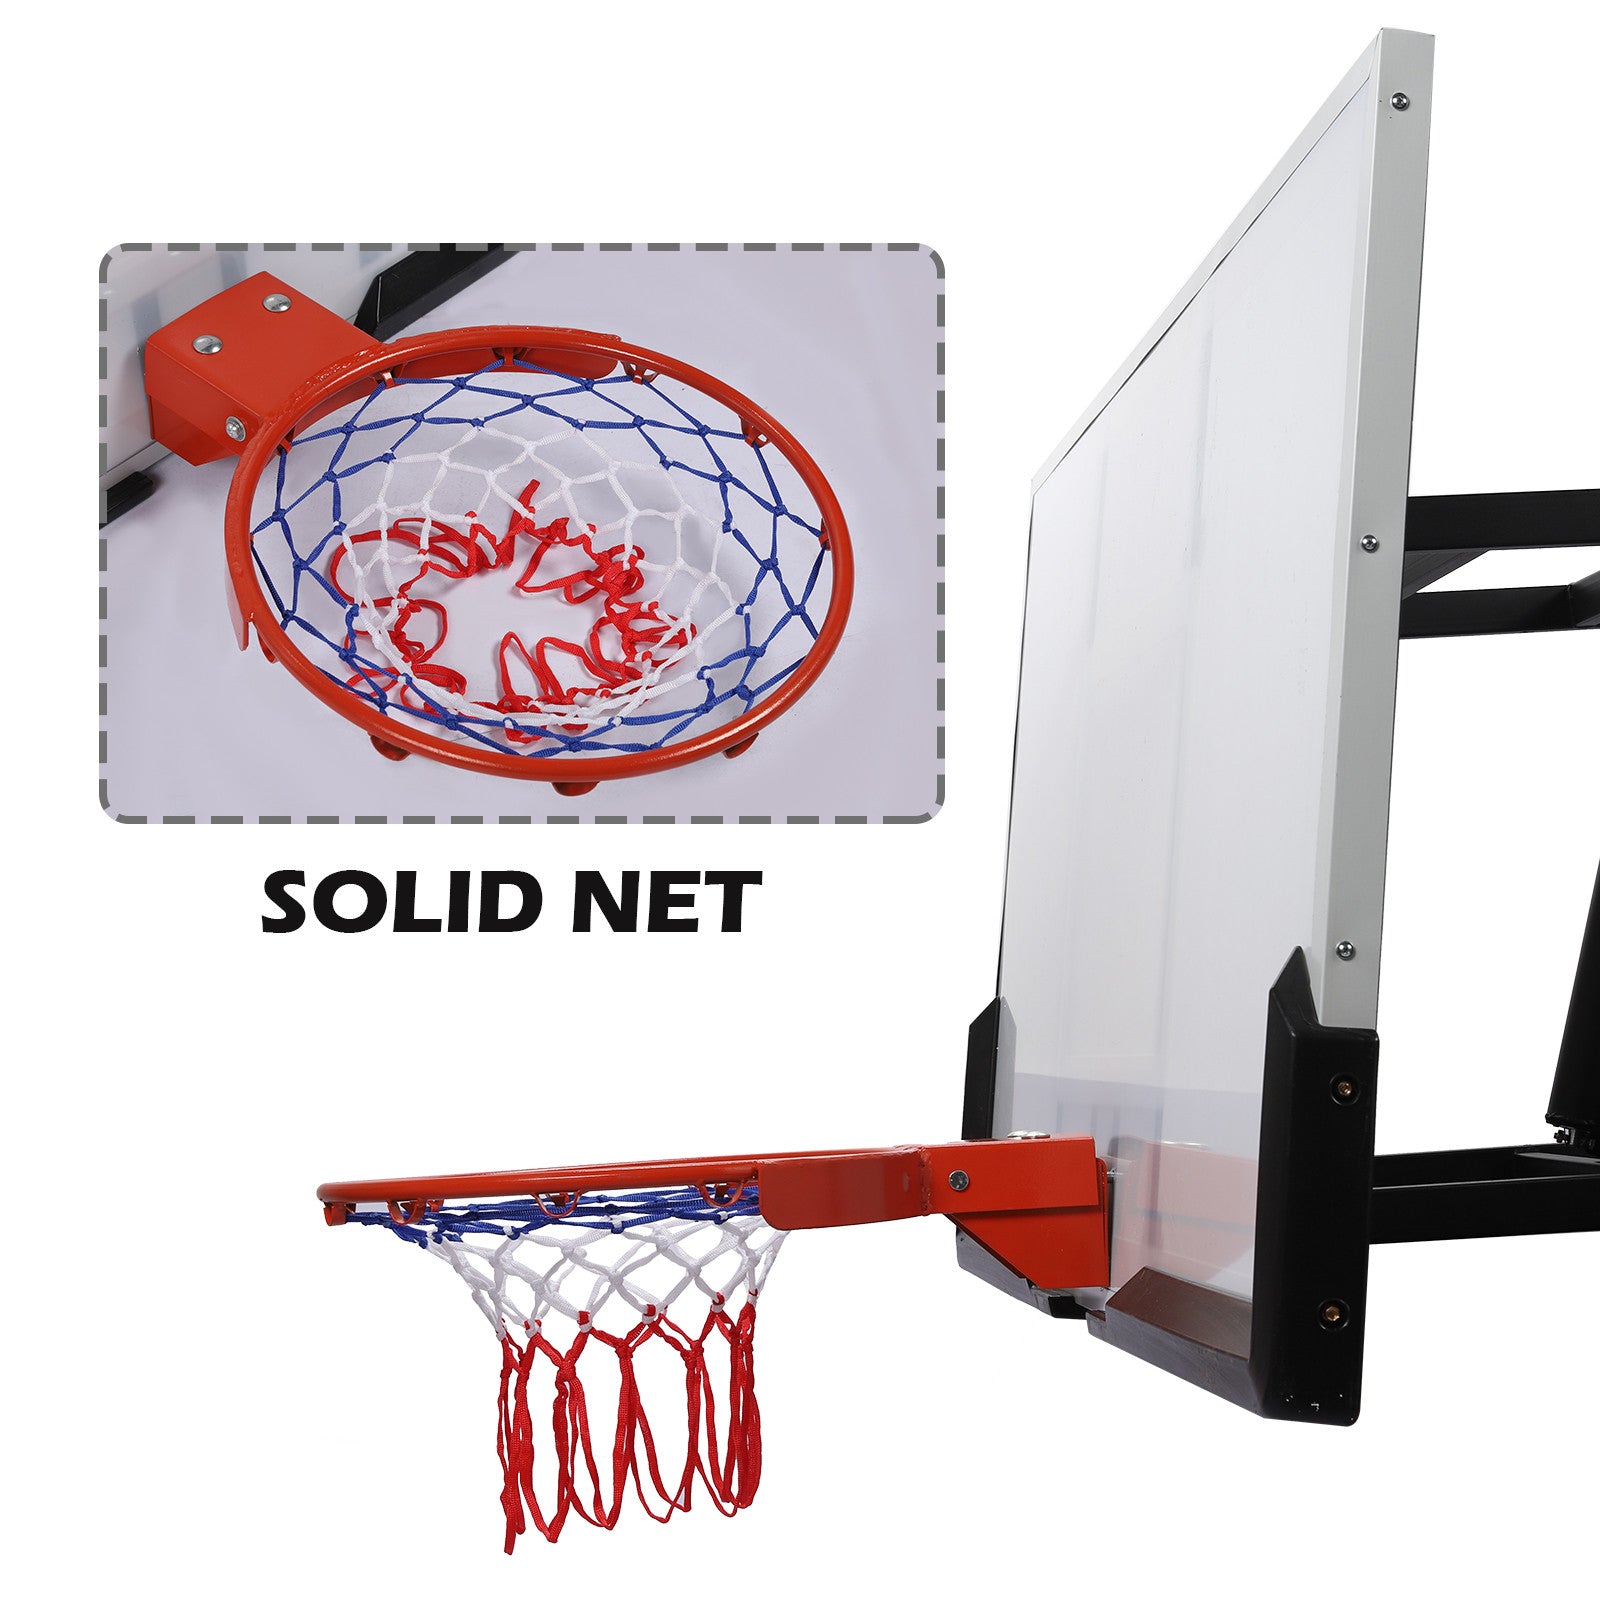 54” Wall Mounted Adjustable-Height Basketball Hoop With Quick Play Design US